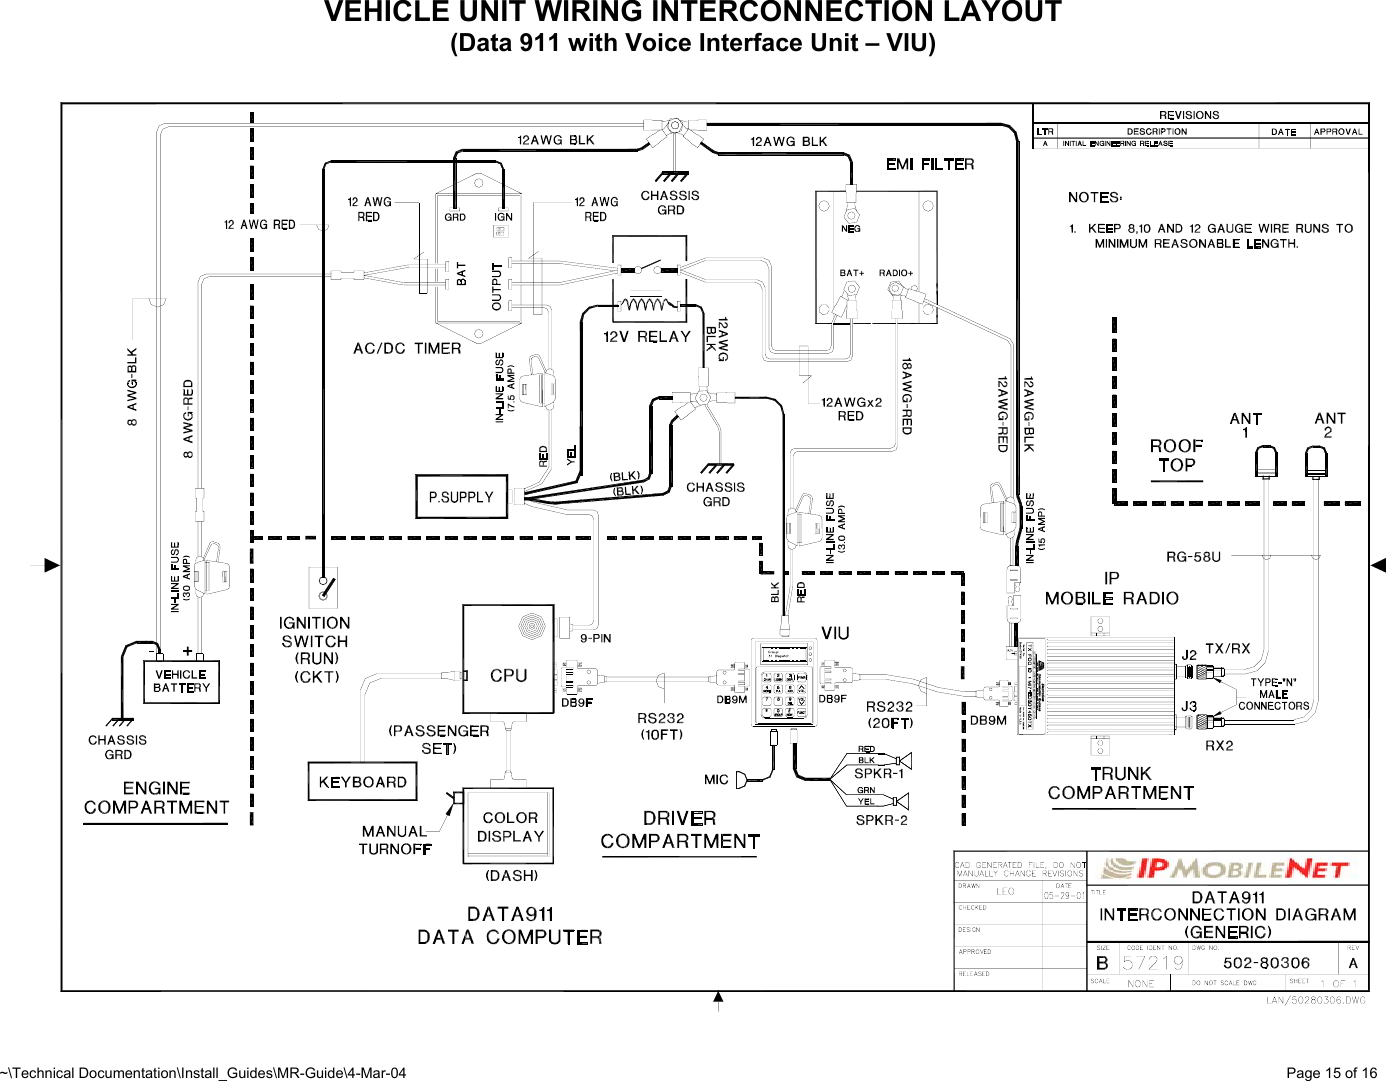 ~\Technical Documentation\Install_Guides\MR-Guide\4-Mar-04   Page 15 of 16 VEHICLE UNIT WIRING INTERCONNECTION LAYOUT (Data 911 with Voice Interface Unit – VIU)        